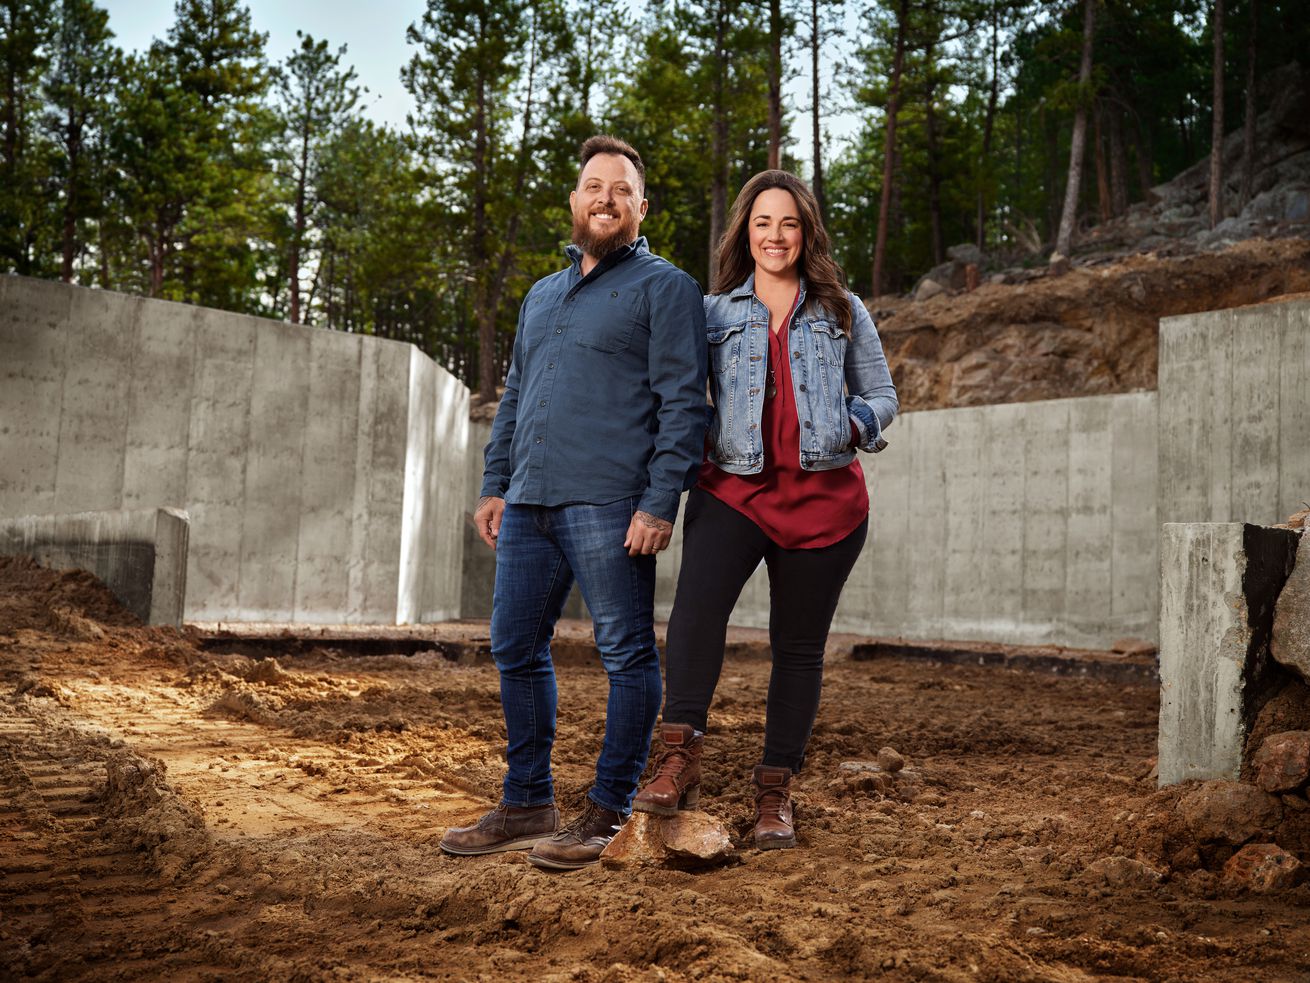 The Roku Channel Launches All-New Original Series “Idea House: Mountain Modern” this Thursday, July 28